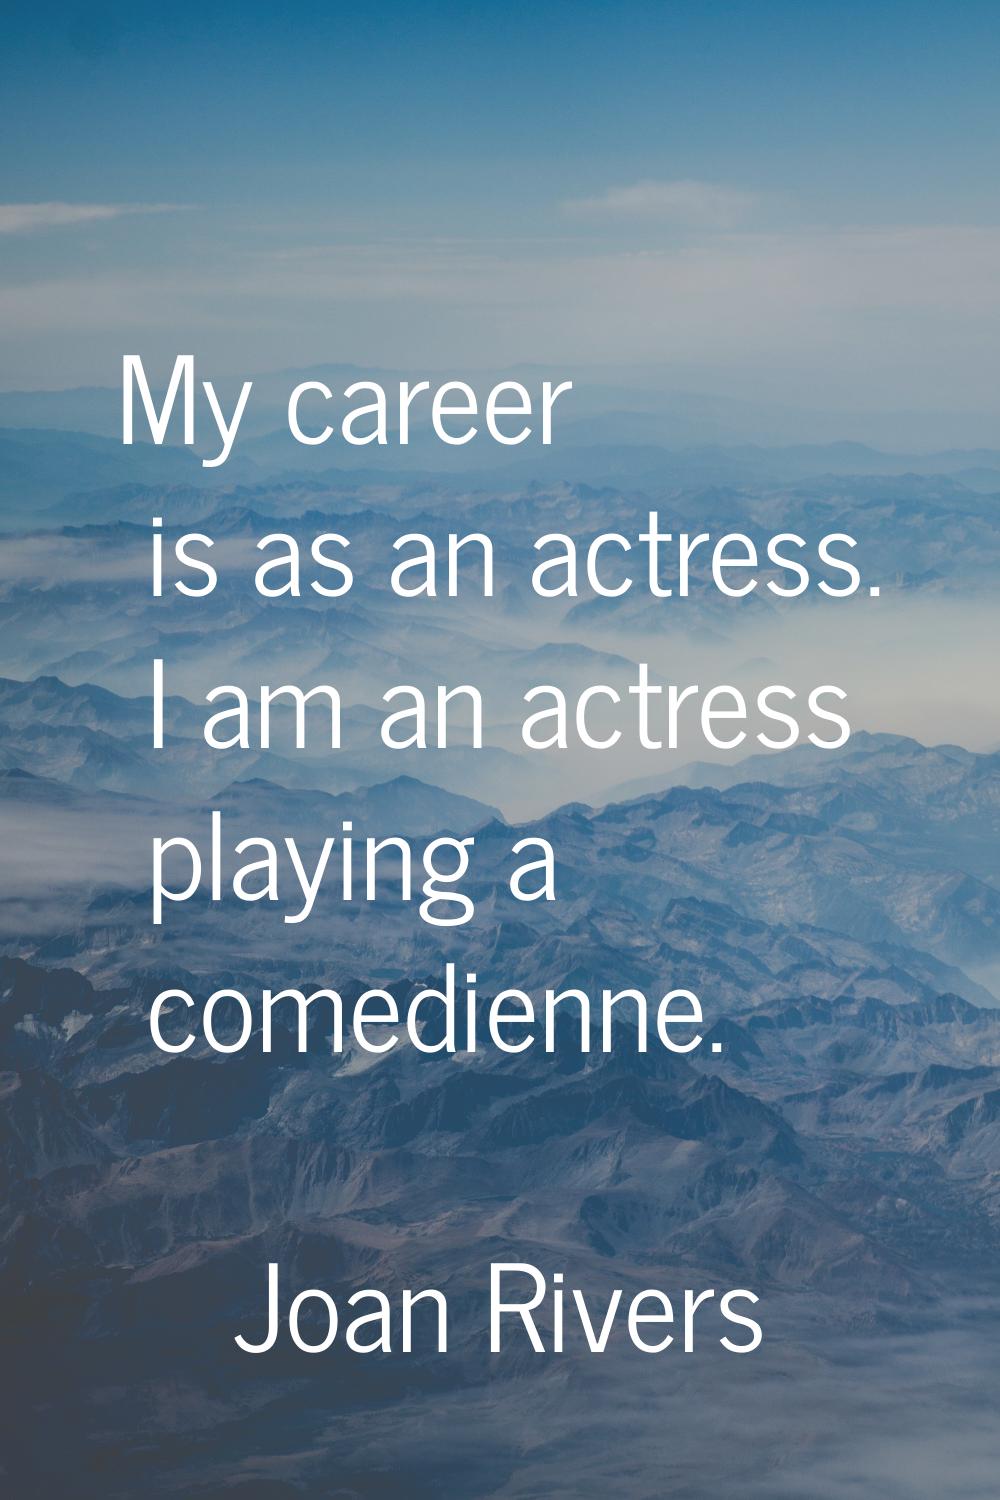 My career is as an actress. I am an actress playing a comedienne.